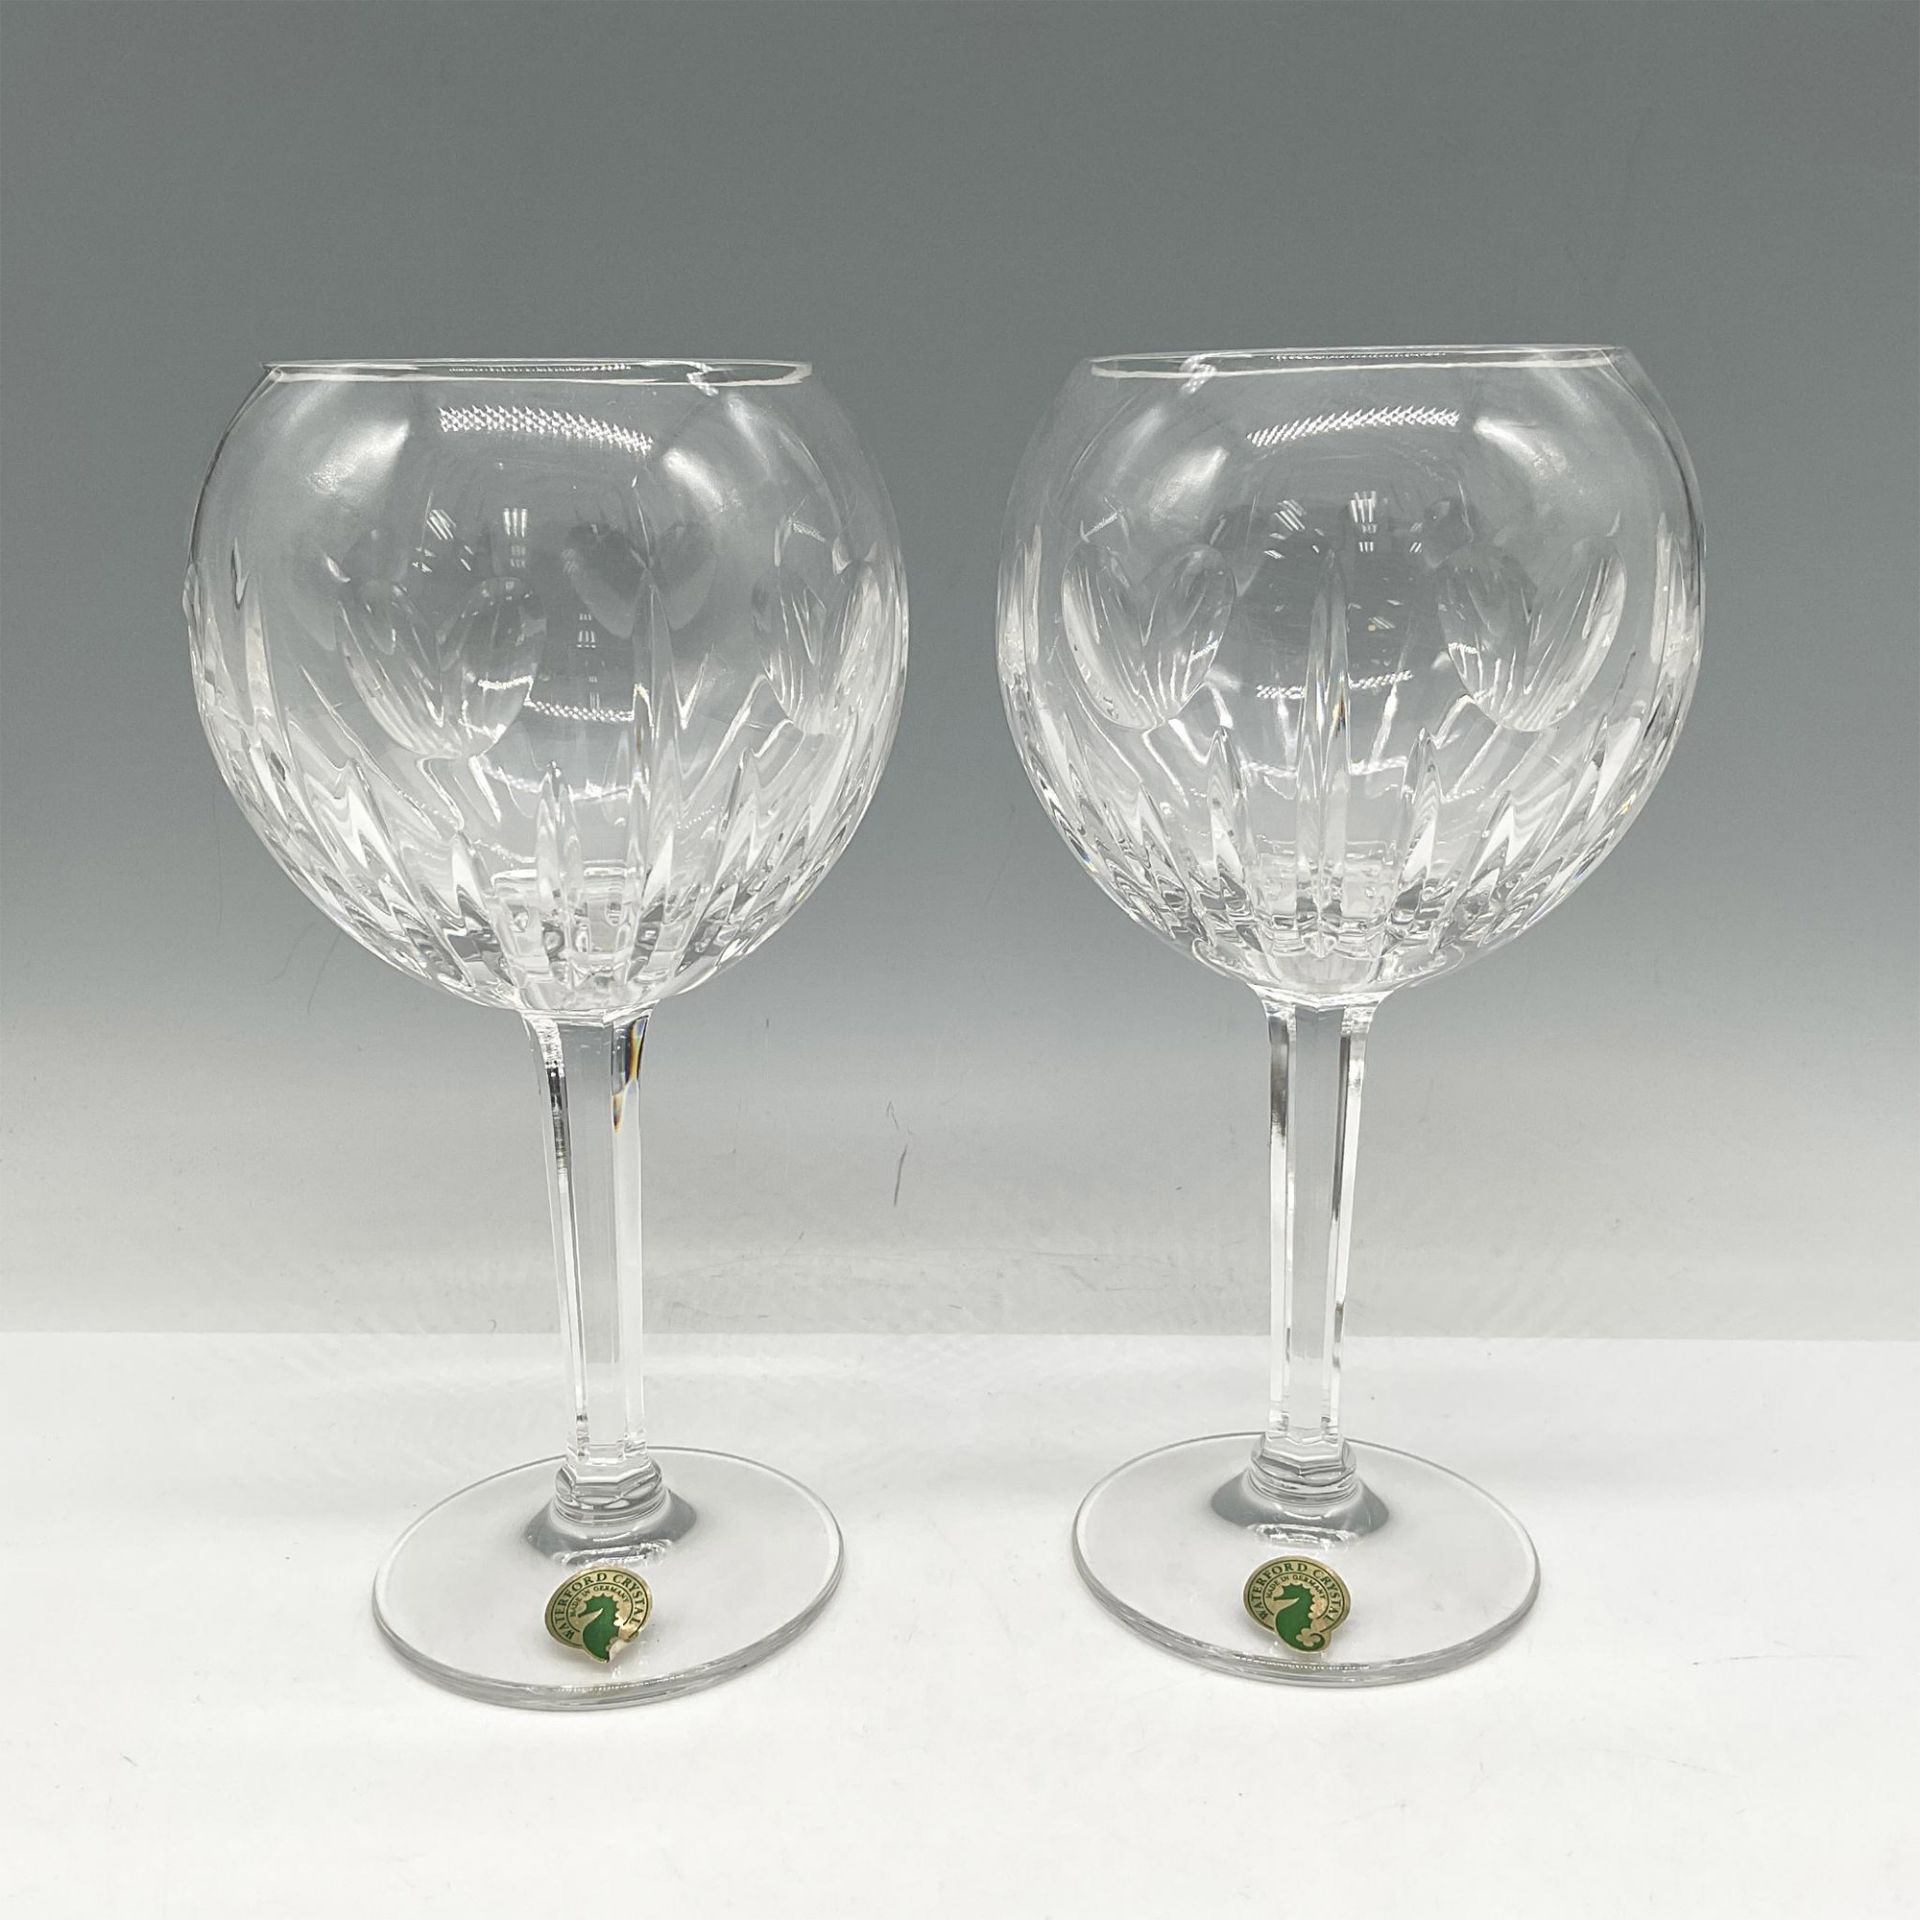 2pc Waterford Crystal Toasting Goblets, Millenium Love